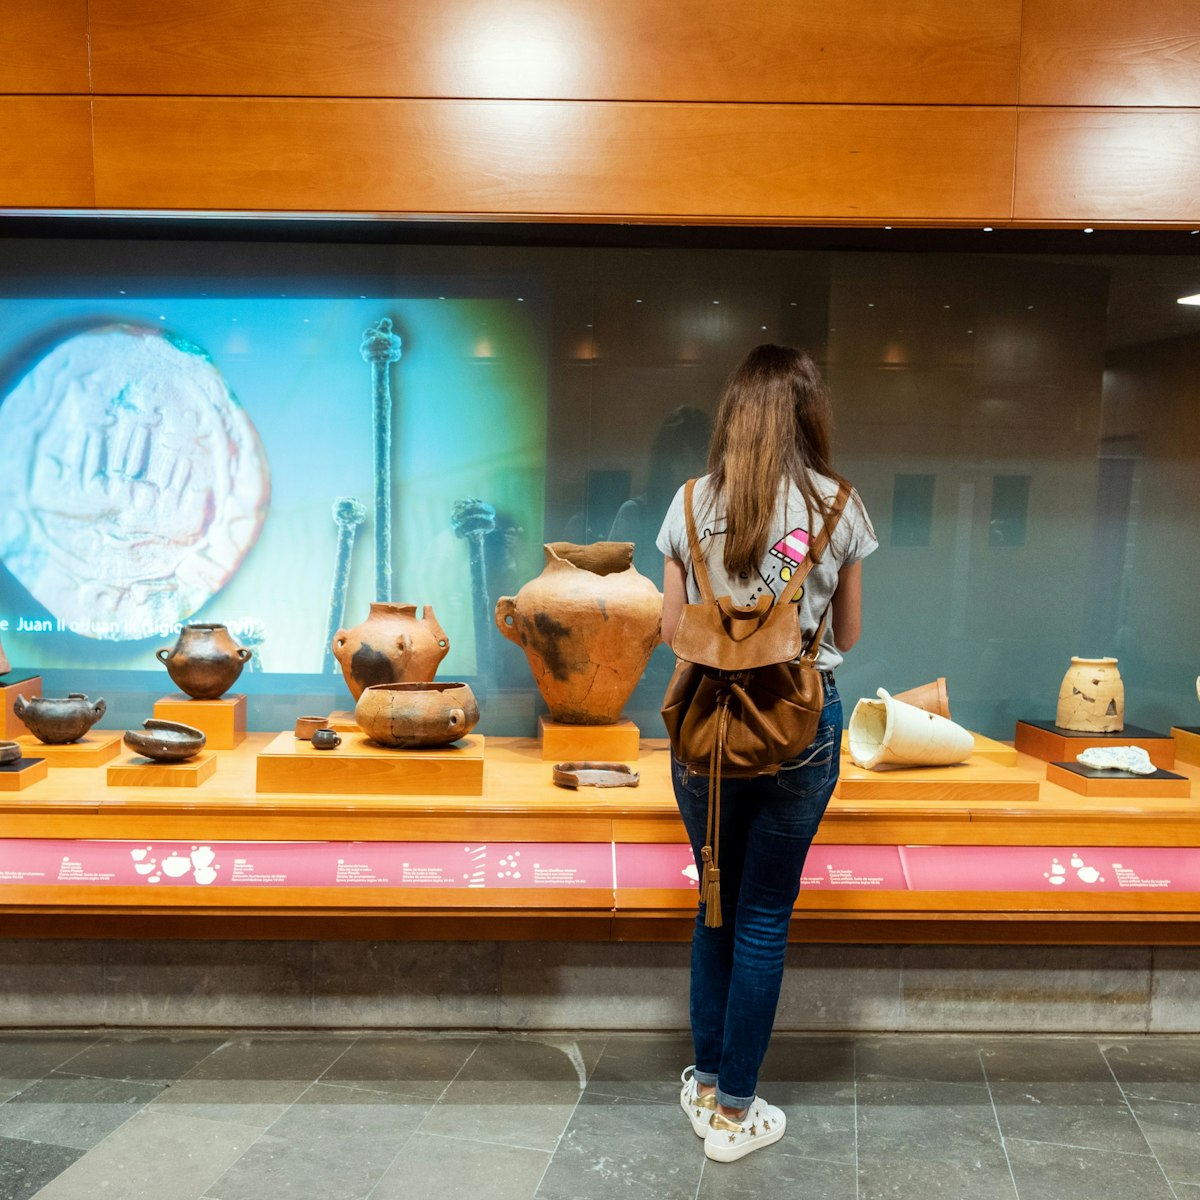 Galdar, Spain - March 2, 2019: Woman admiring the Interior of museum and Archaeological park, Cueva Pintada, in Galdar Gran Canaria, Spain . ; 
Cueva Pintada Museum & Archaeological Park

Shutterstock ID 1462682909; your: Bridget Brown; gl: 65050; netsuite: Online Editorial; full: POI Image Update